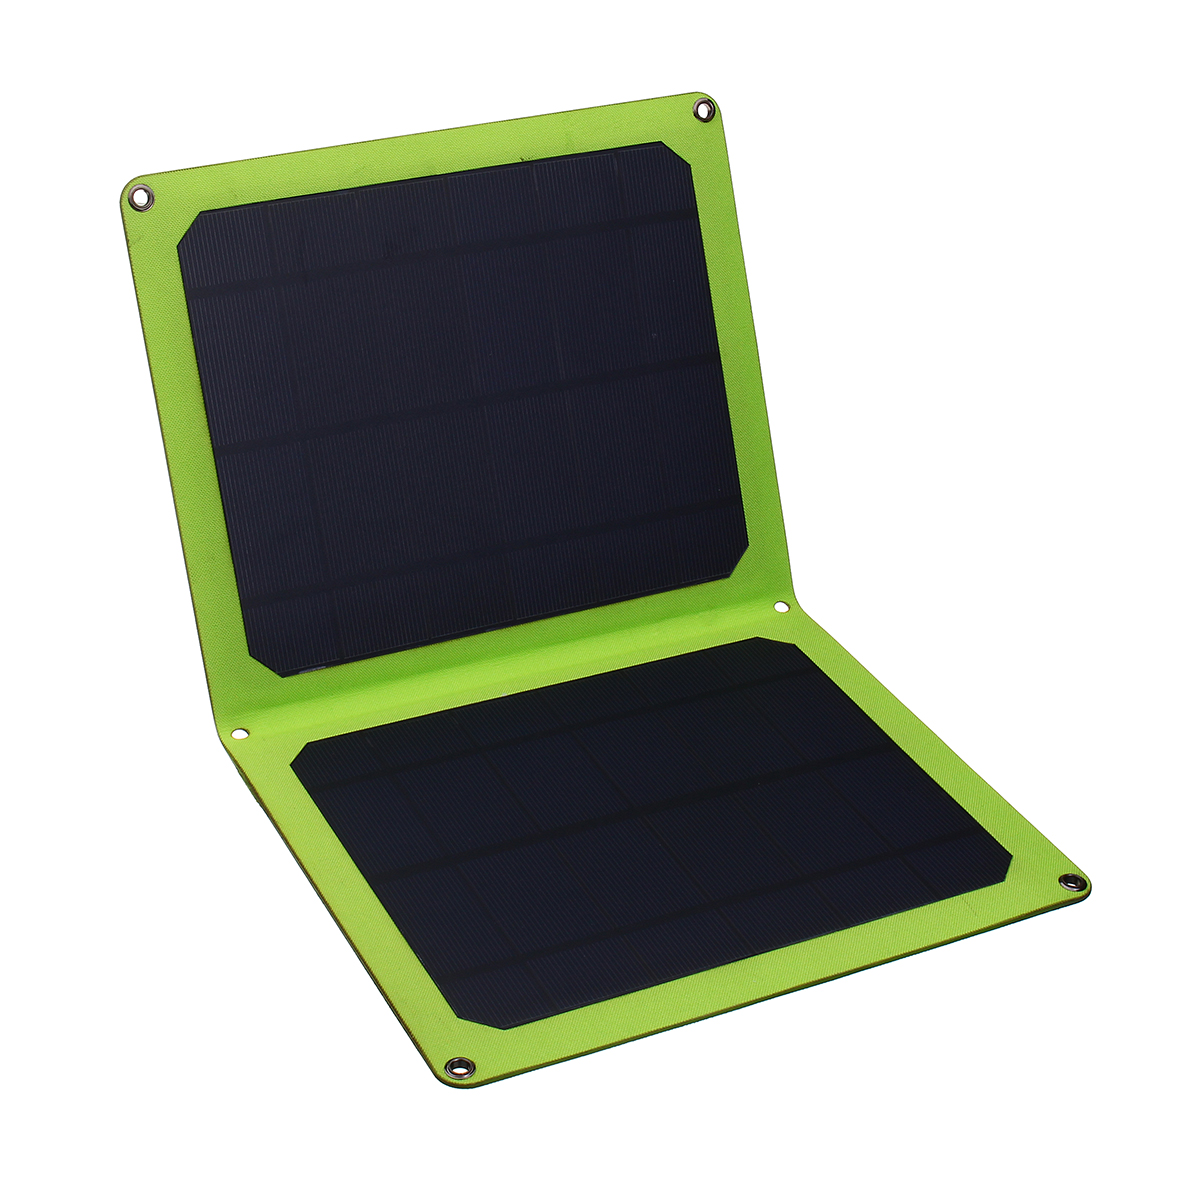 5V 14W Portable Folding Single Crystal Solar Panel with USB Socket for Outdoor 12